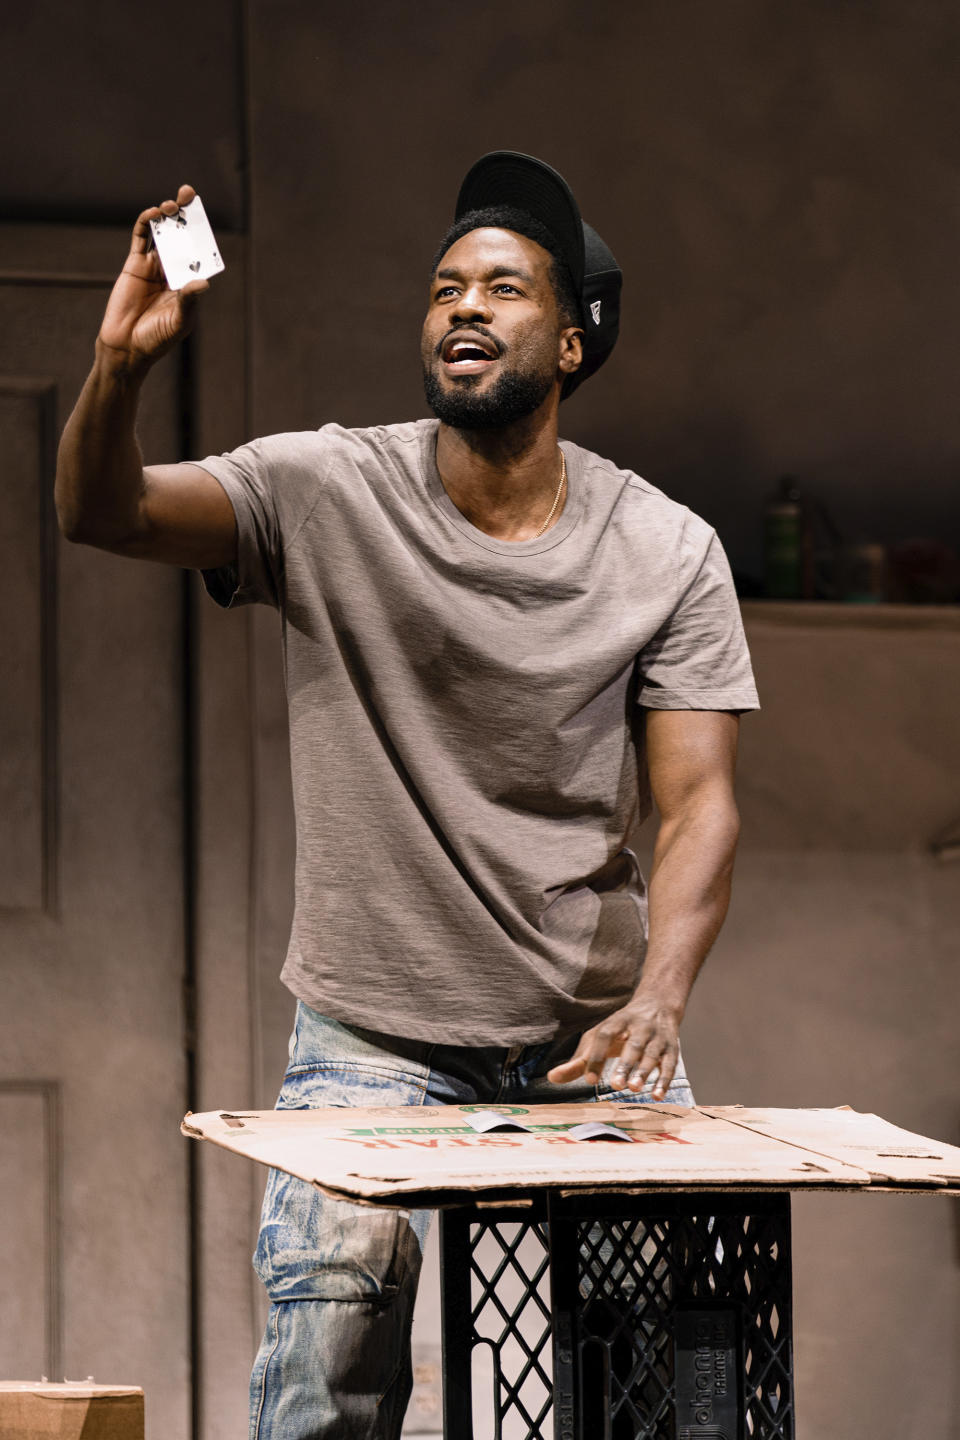 This image released by Polk & Co. shows Yahya Abdul-Mateen II during a performance of the play “Topdog/Underdog.” (Marc J. Franklin